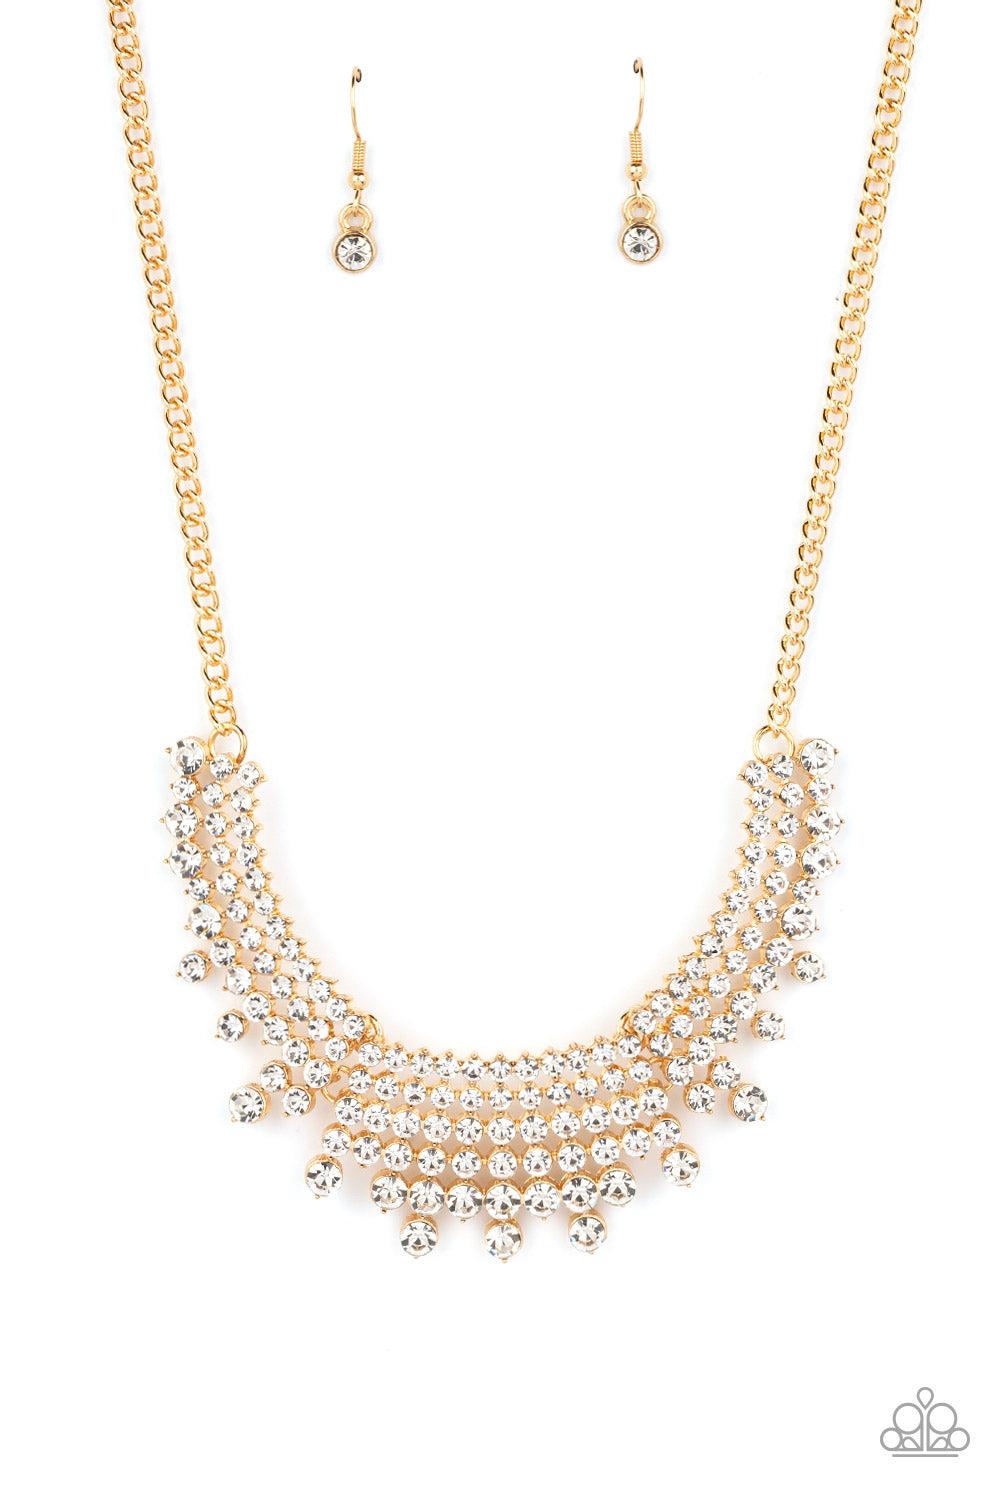 Shimmering Song Gold &amp; White Rhinestone Necklace - Paparazzi Accessories- lightbox - CarasShop.com - $5 Jewelry by Cara Jewels